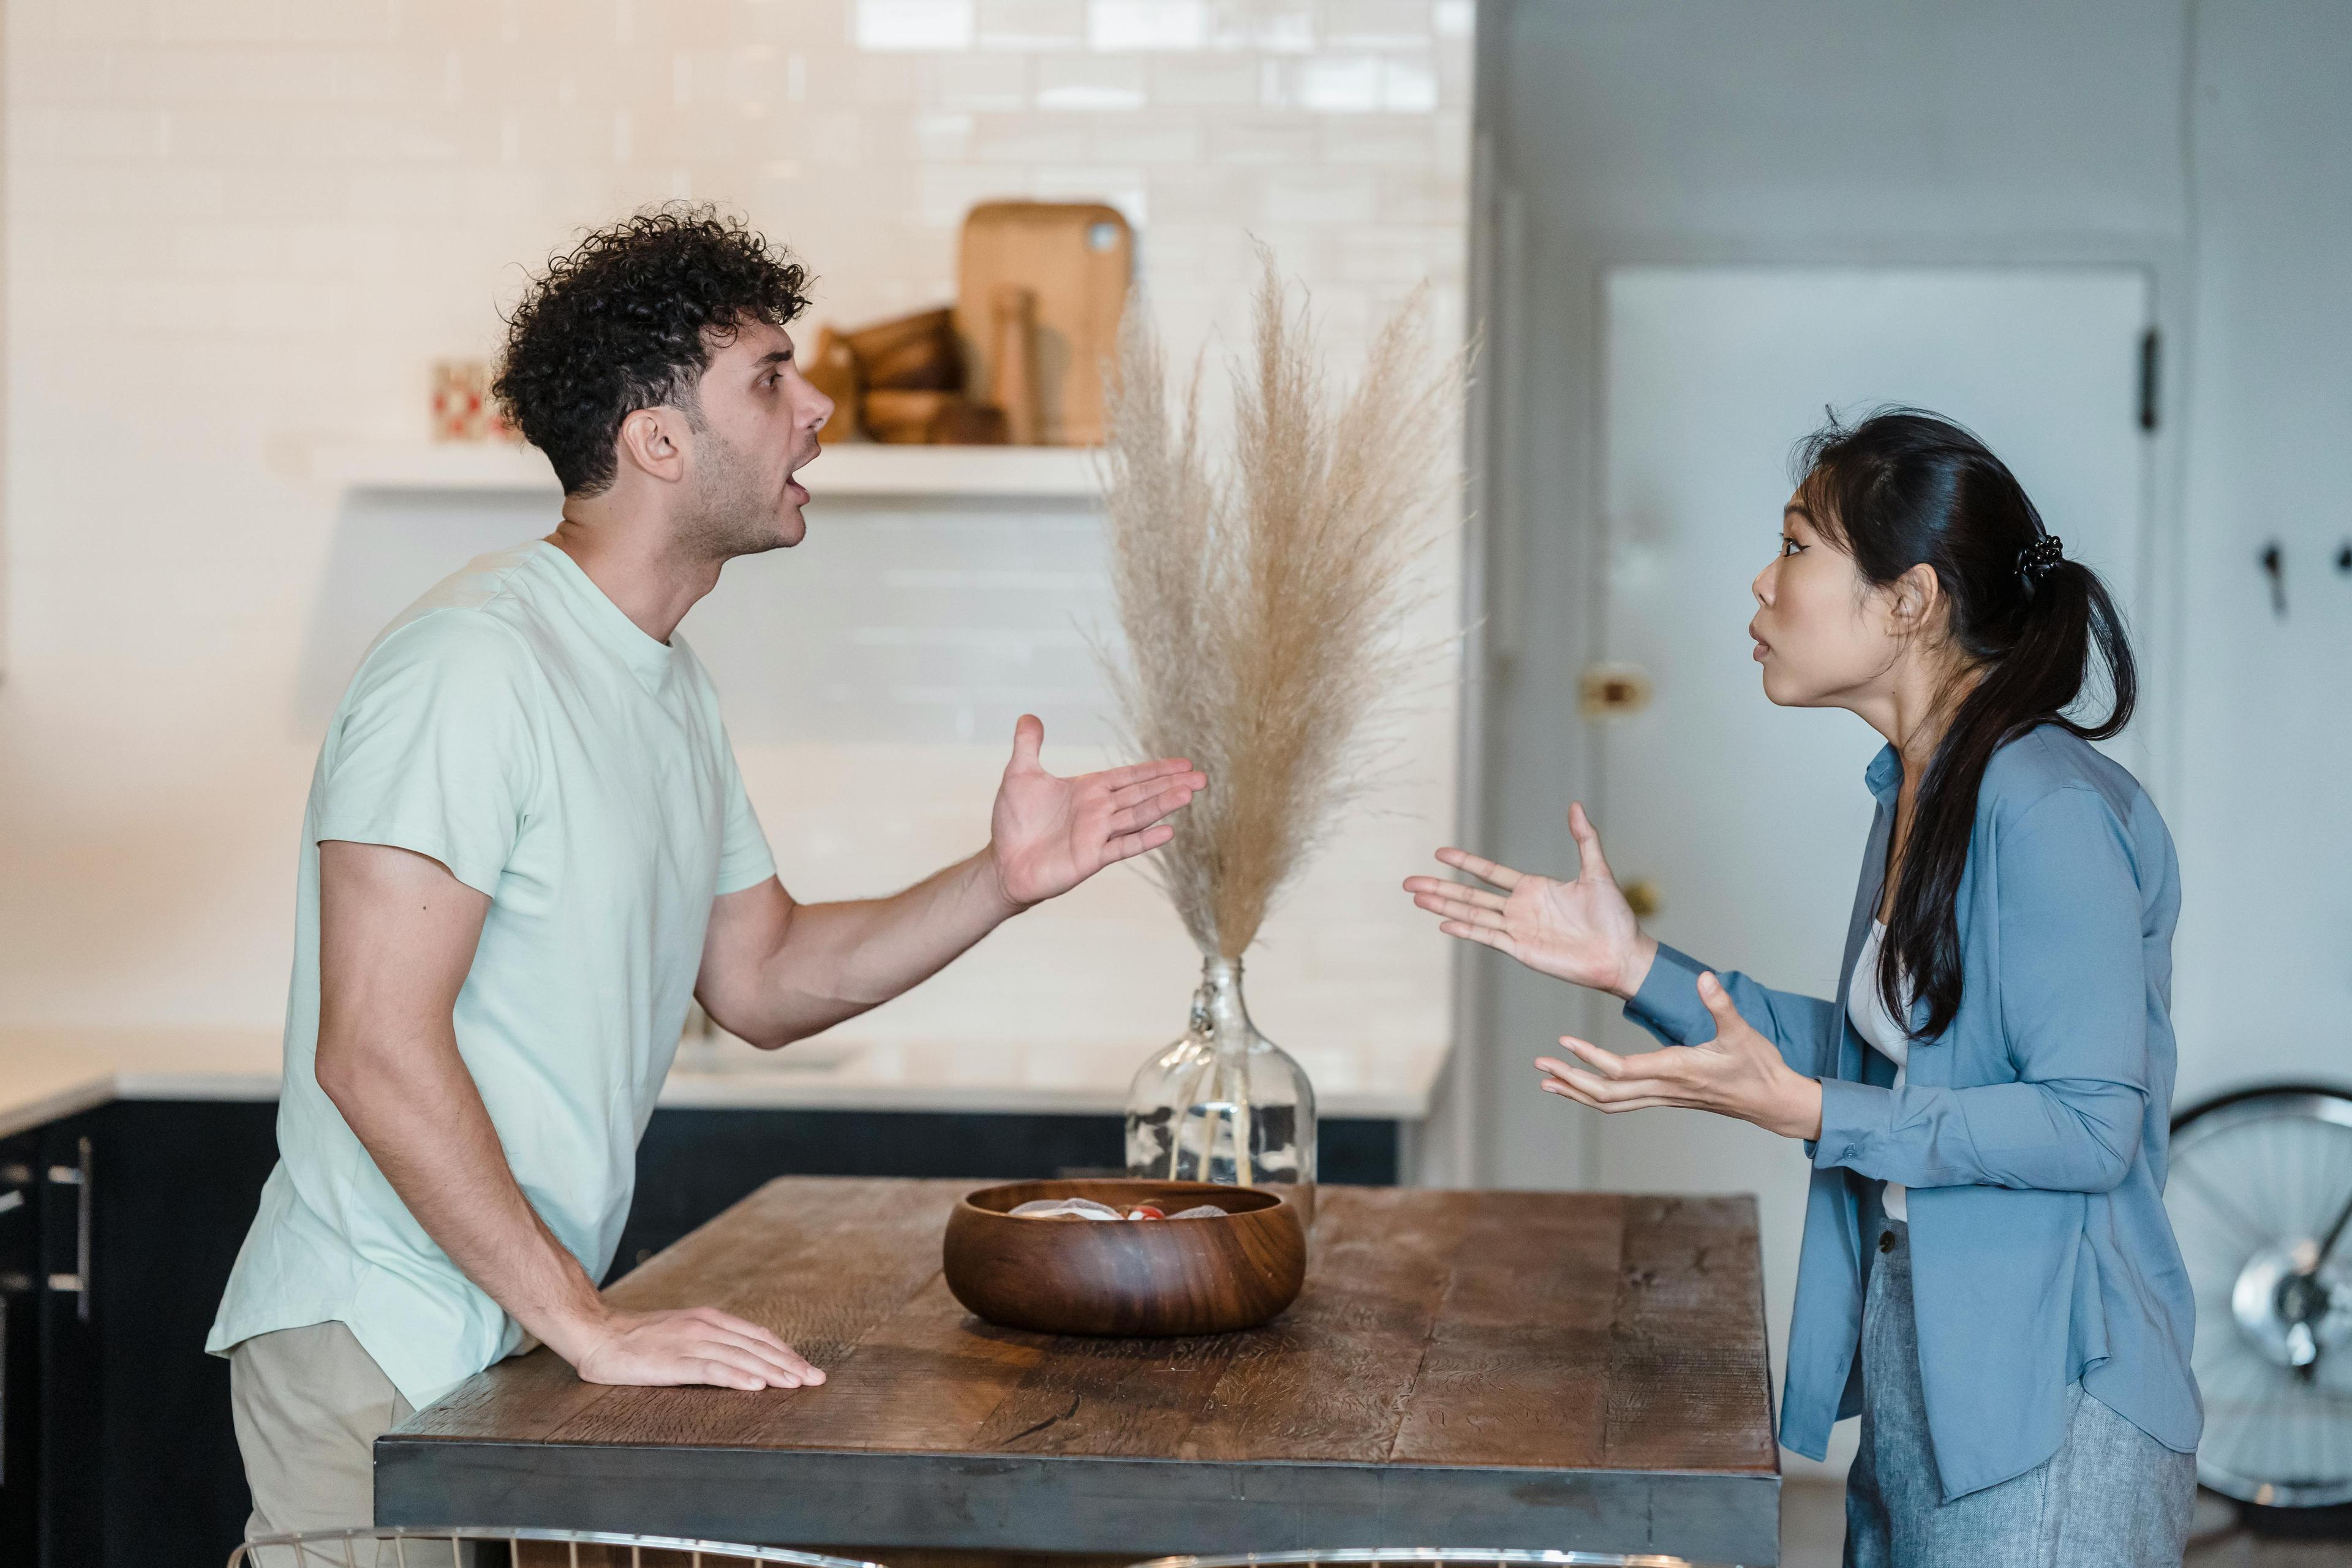 A man and woman discussing in a kitchen. Symbolizes borderline personality disorder and relationships.